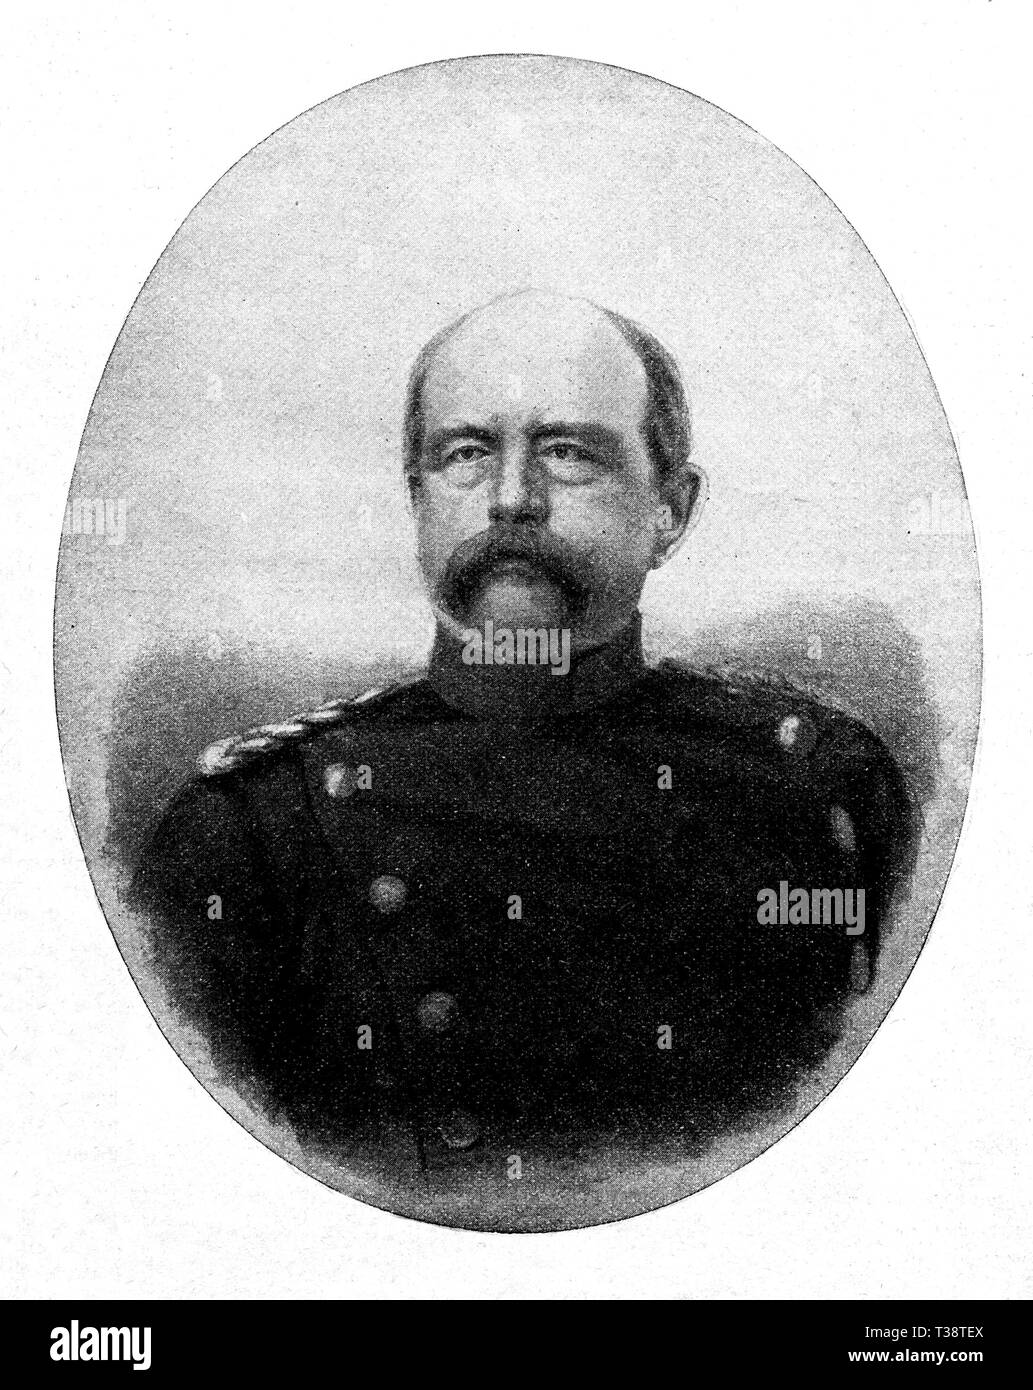 Otto Bismarck. By llithography Rocca. Digital improved reproduction from Illustrated overview of the life of mankind in the 19th century, 1901 edition, Marx publishing house, St. Petersburg. Stock Photo